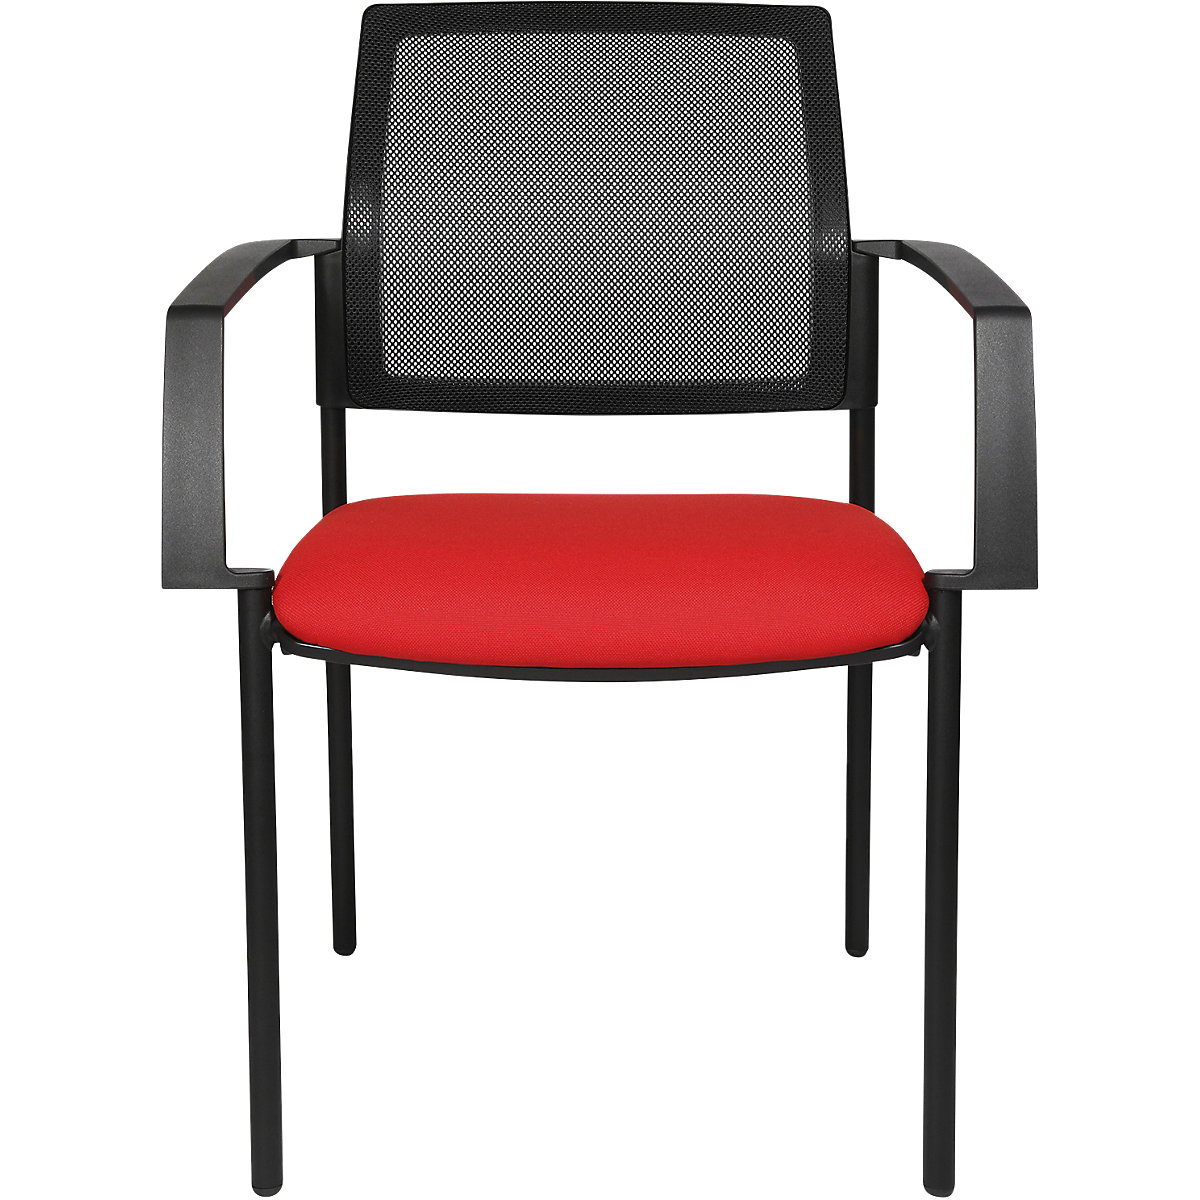 Mesh stacking chair – Topstar, 4-leg, pack of 2, red seat, black frame-4